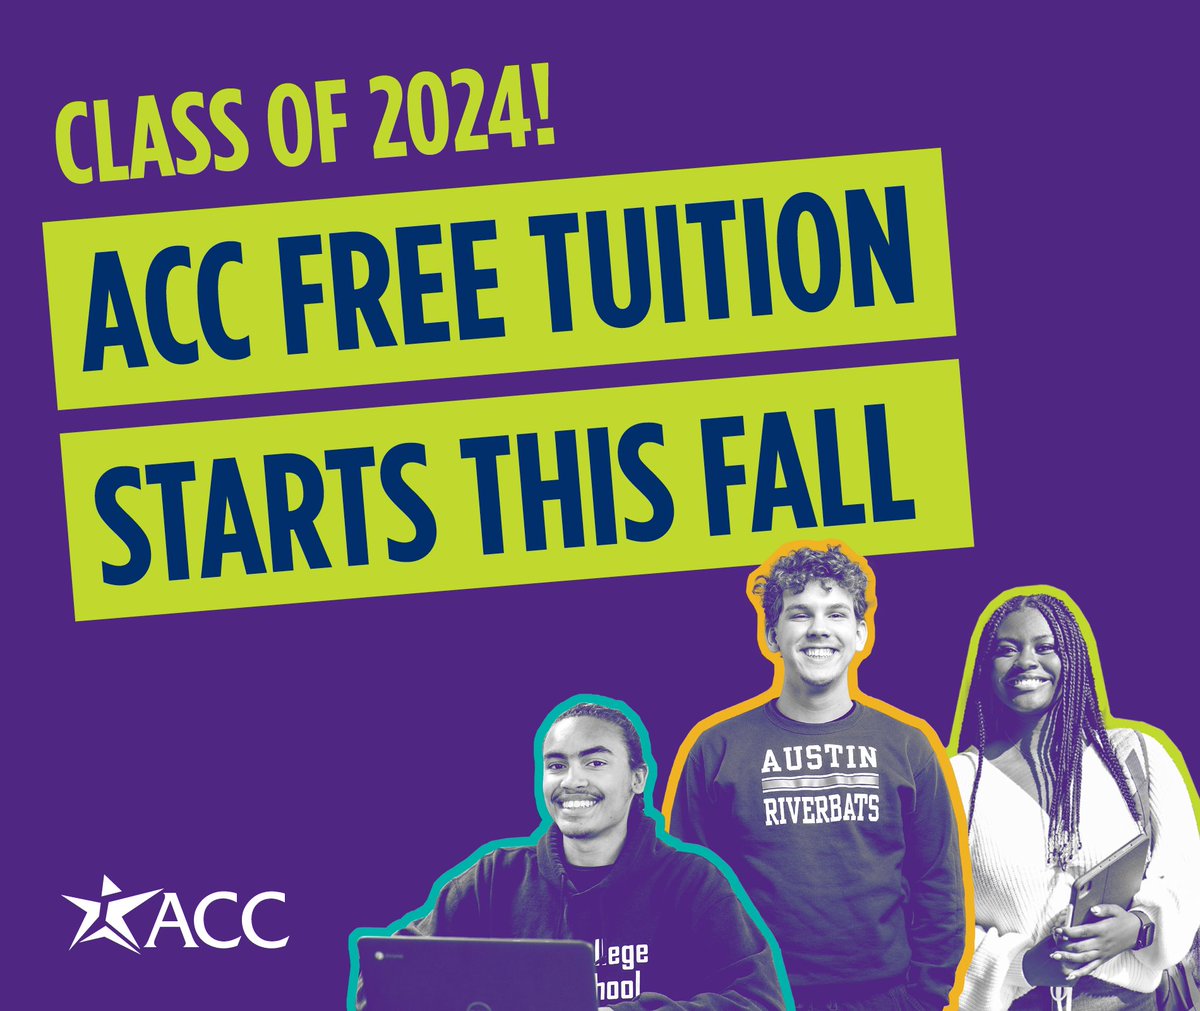 ICYMI: ACC’s Board of Trustees approved the Free Tuition Program, allowing eligible high school graduates and GED® completers to attend ACC at no cost for tuition beginning this fall. Visit the link below to ask the questions you may not see in our FAQs. fs27.formsite.com/accpicm/zzwgr0…